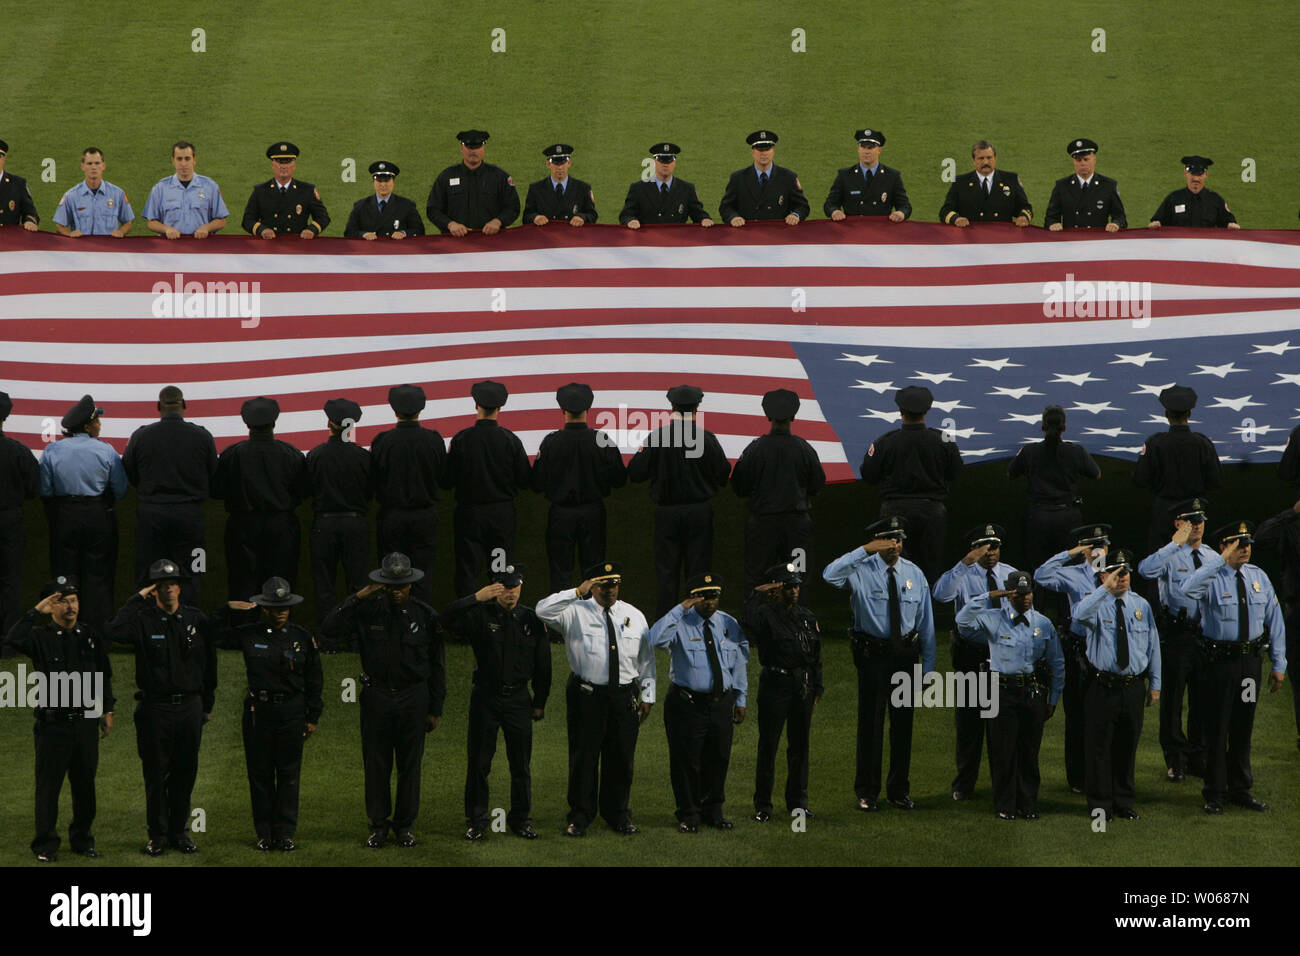 St. Louis area firefighters, police and rescue personel hold an oversized American flag during a moment of silence for the five-year anniversary of 911 attacks of 2001 in New York, Washington and Pennsylvania before the Houston Astros-St. Louis Cardinals game at Busch Stadium in St. Louis on September 11, 2006. (UPI Photo/Bill Greenblatt) Stock Photo